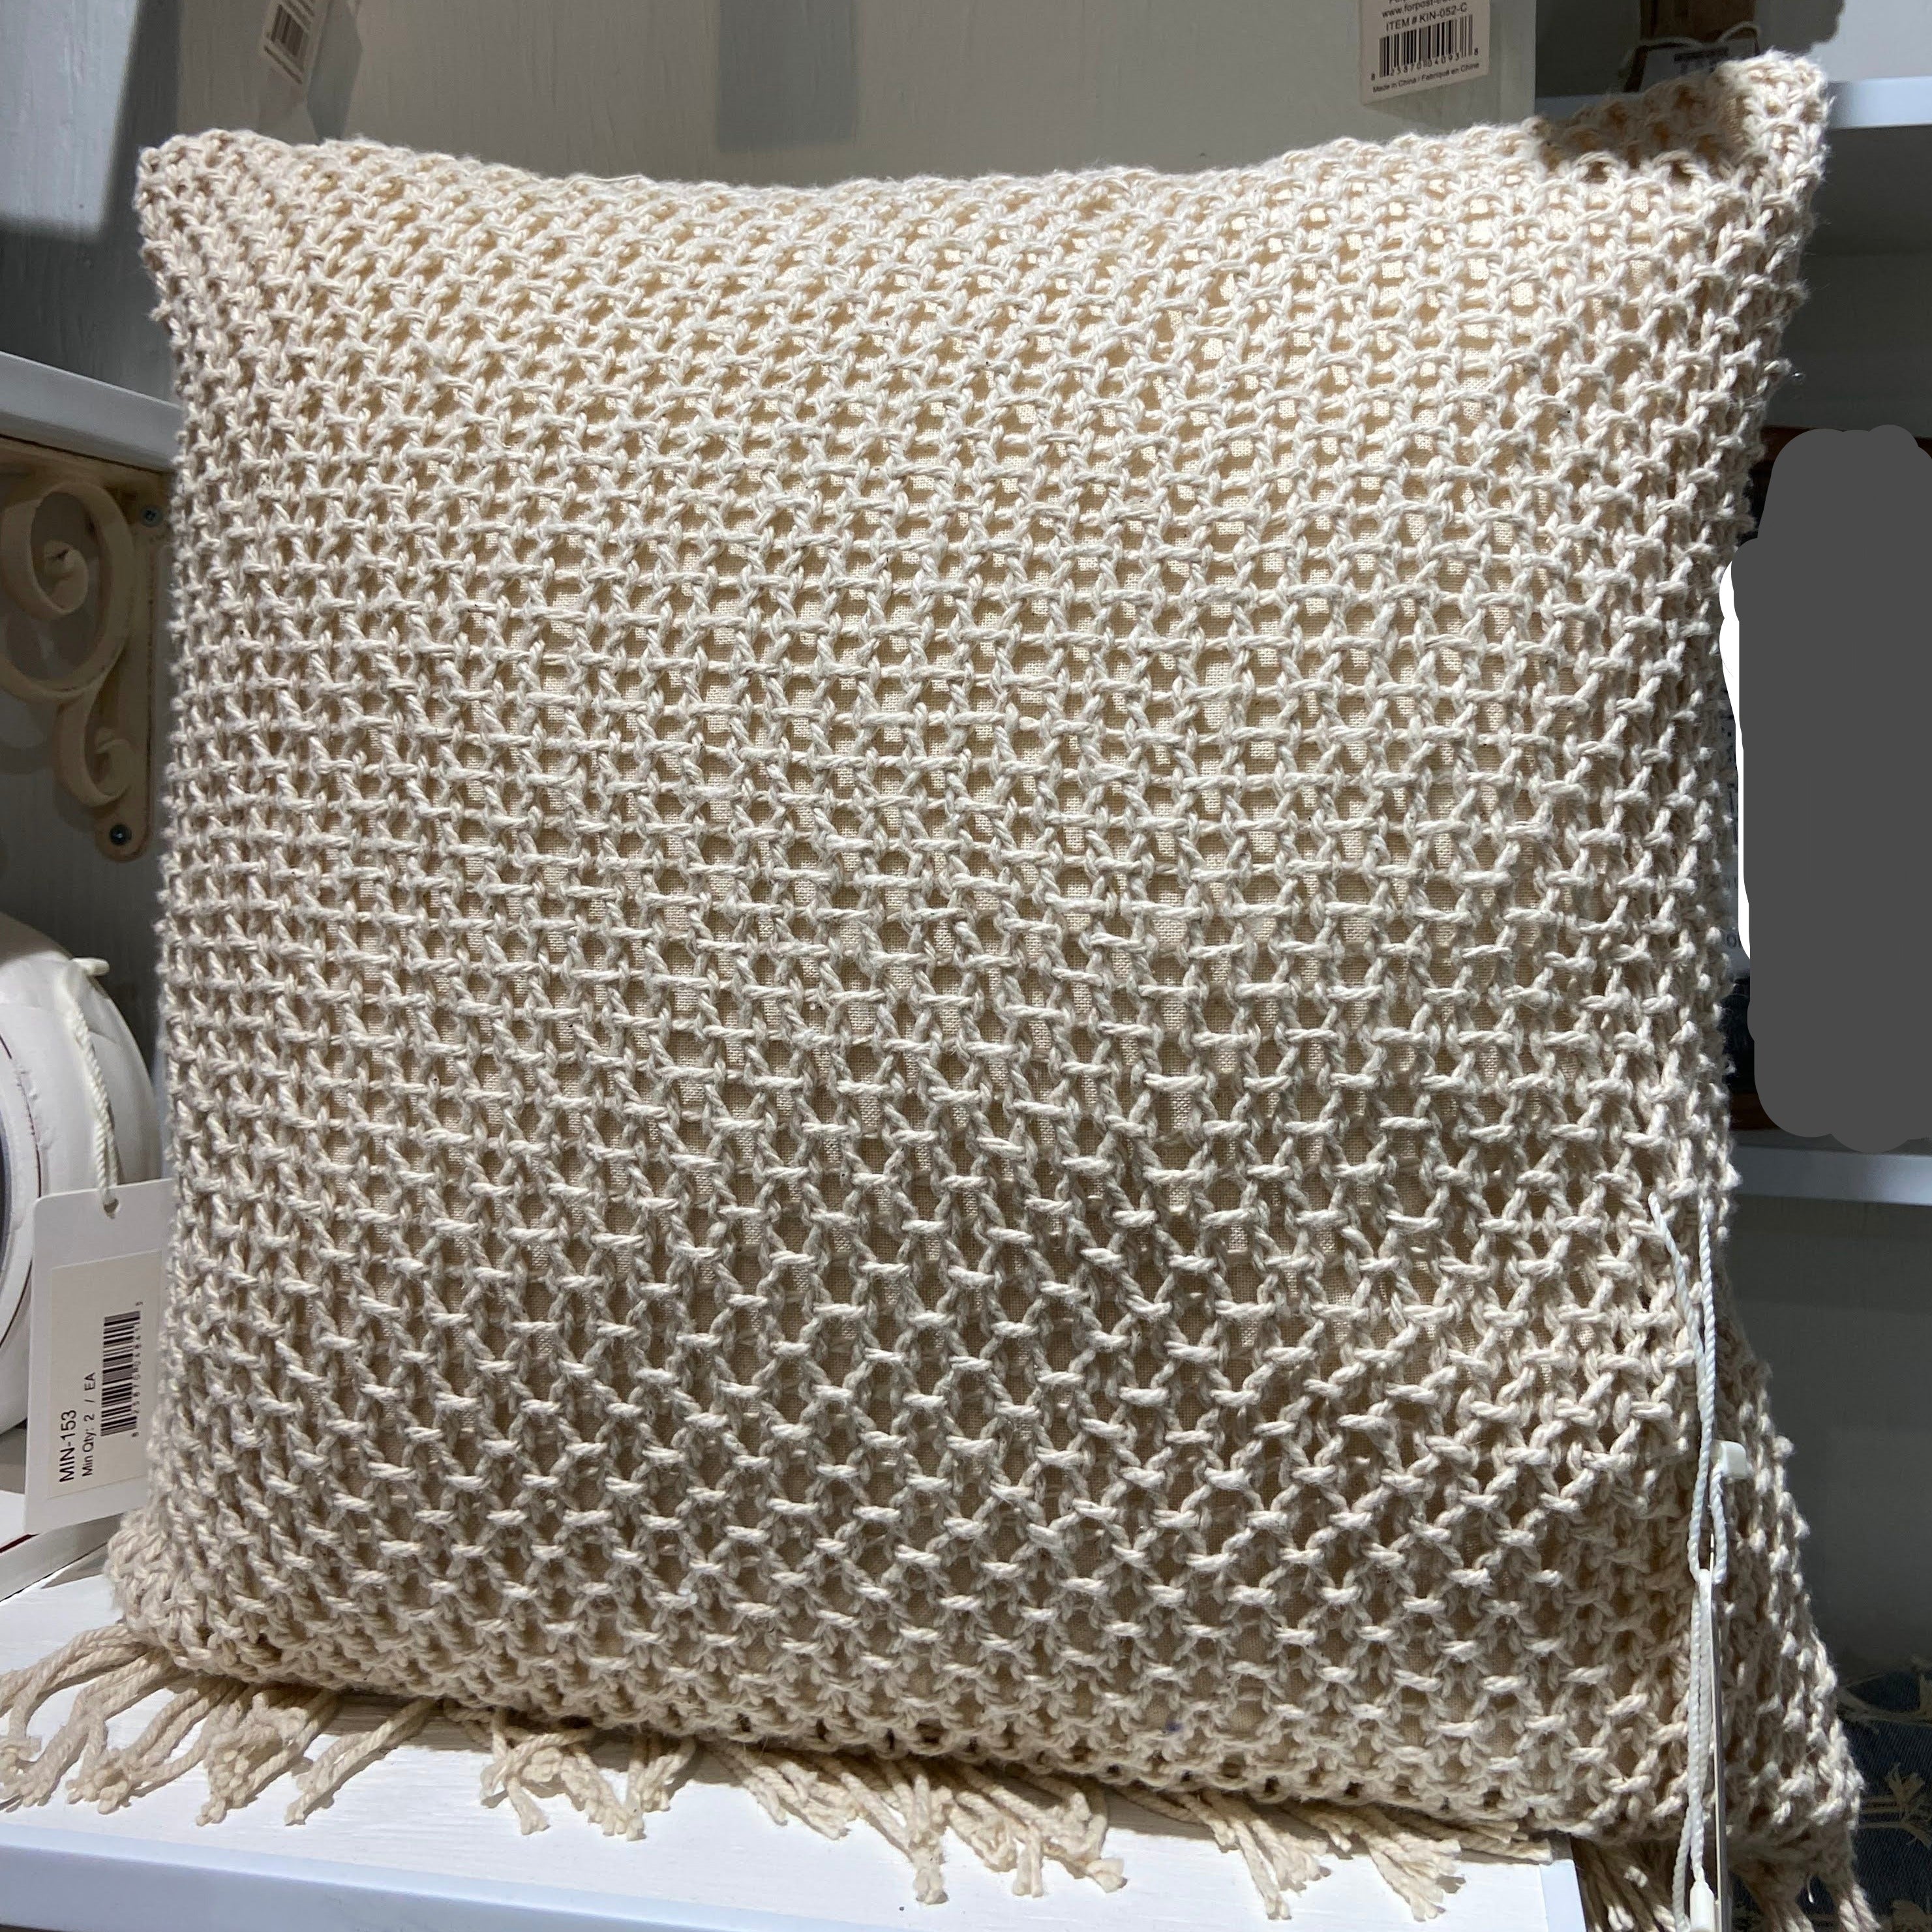 Cream Knitted Cushion Cover